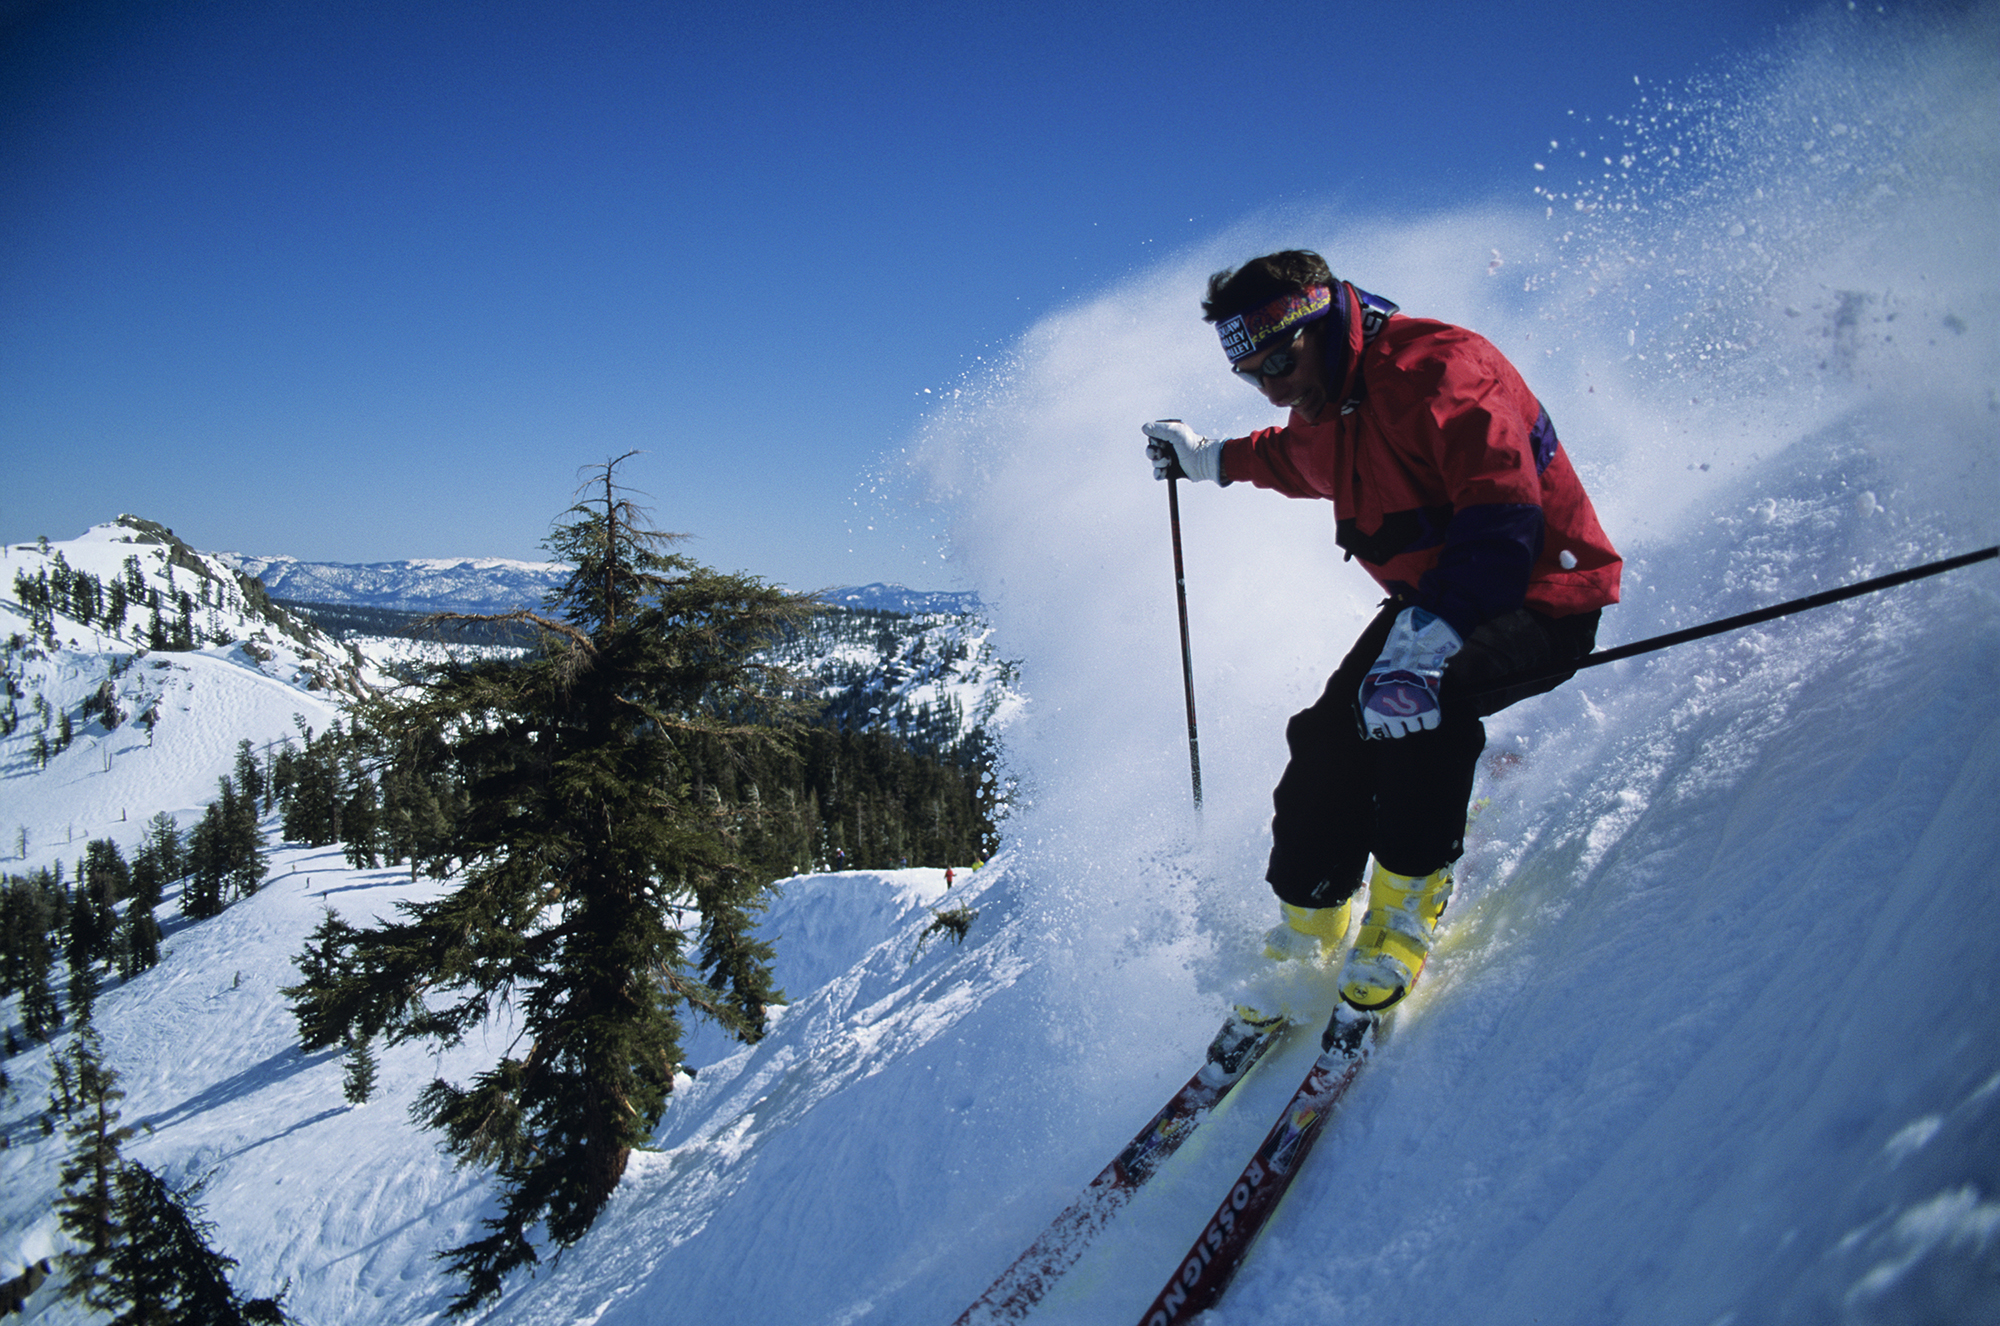 Skiing downhill in sunshine at Squaw Valley, California, USA